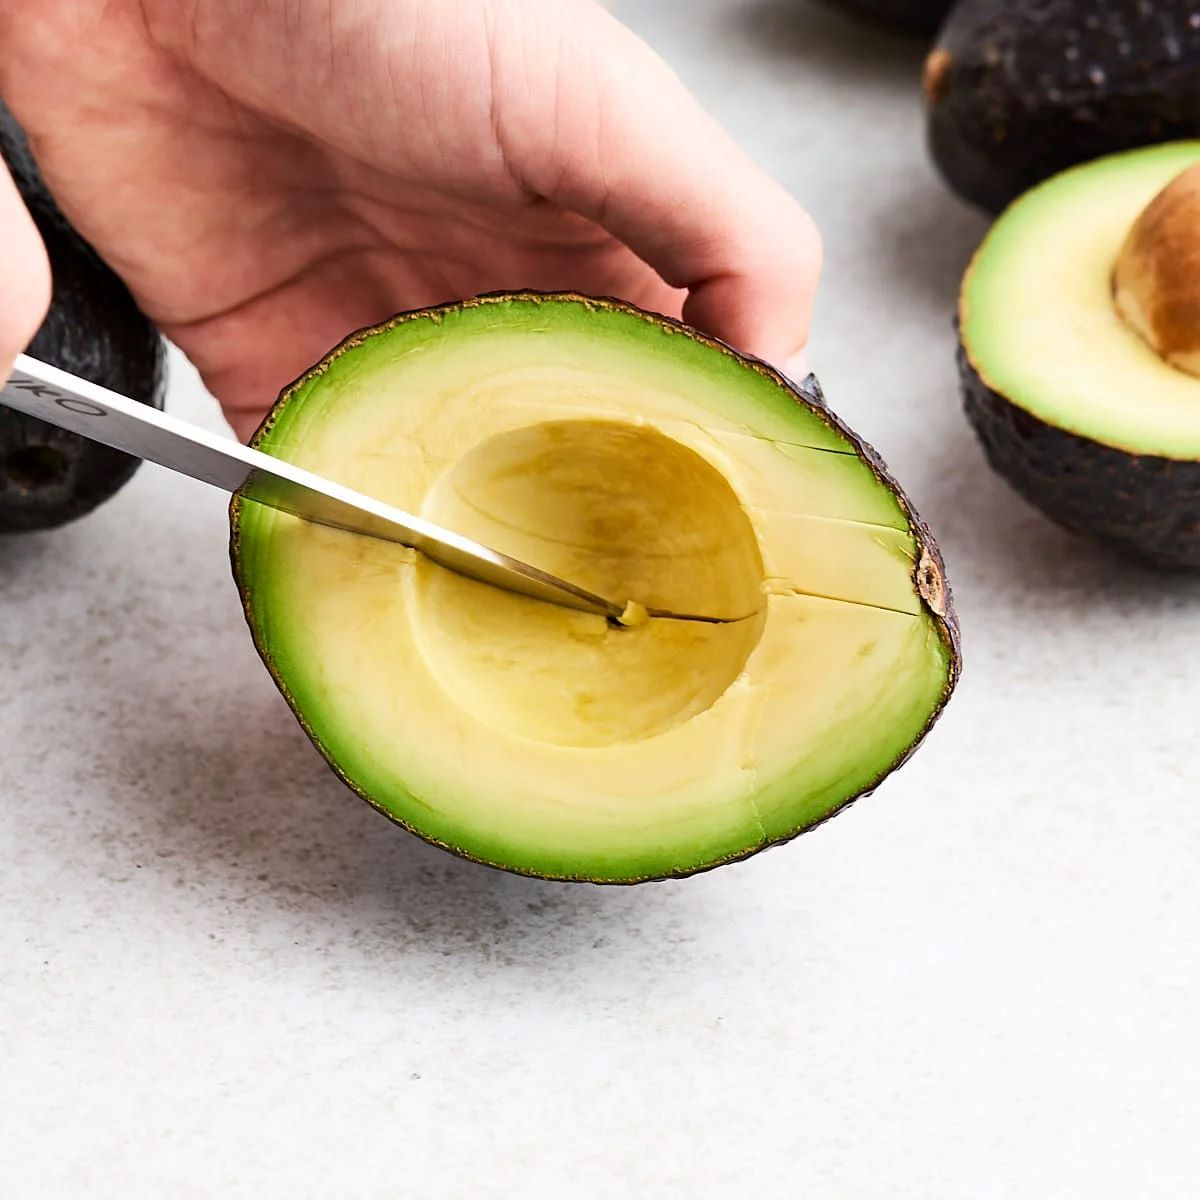 How To Store Avocado After Cutting